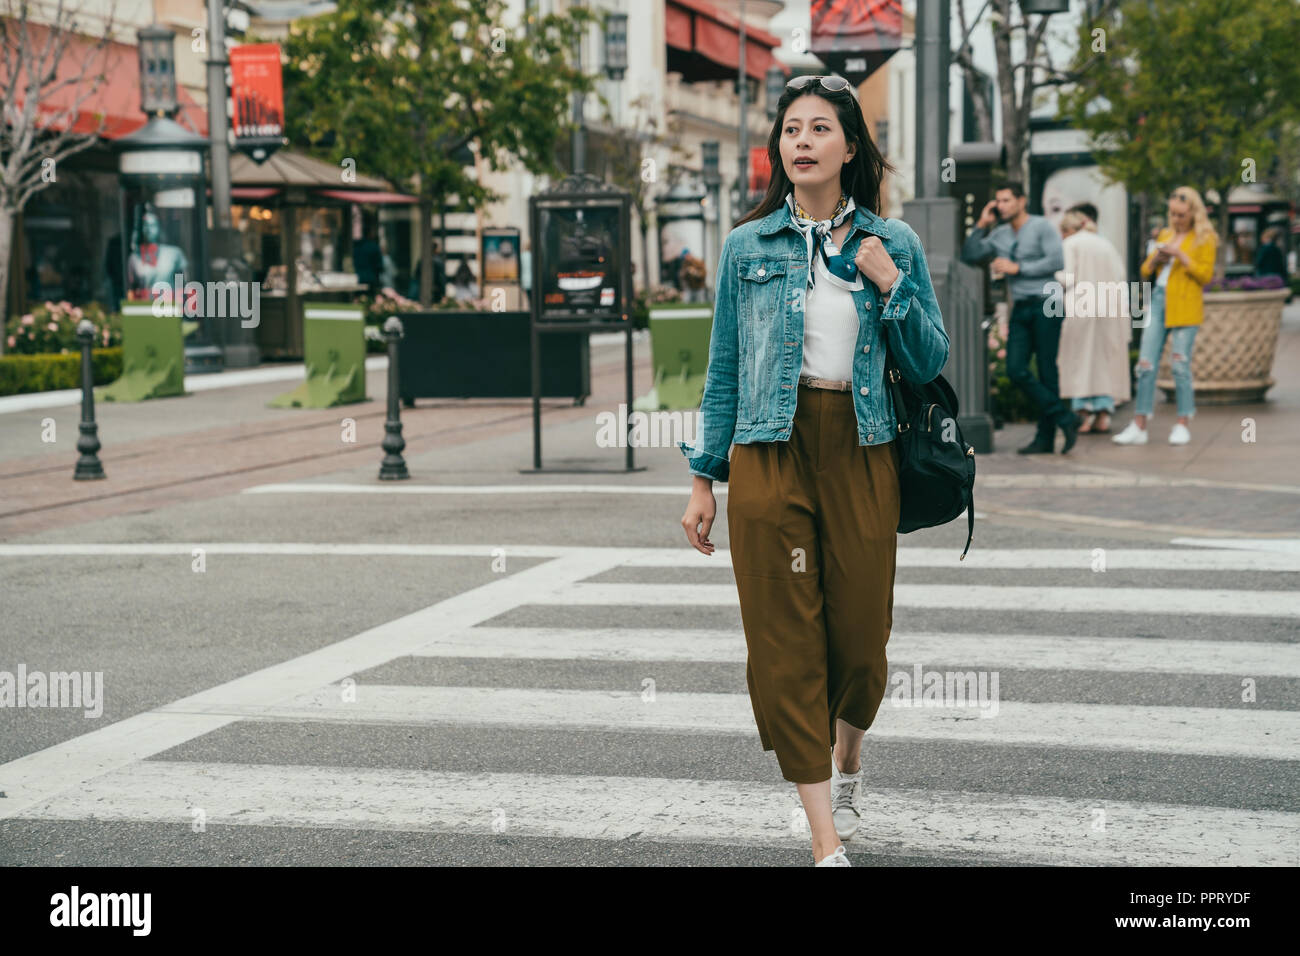 elegant woman crossing road, she looks relax because today is her holiday, she is going shopping Stock Photo